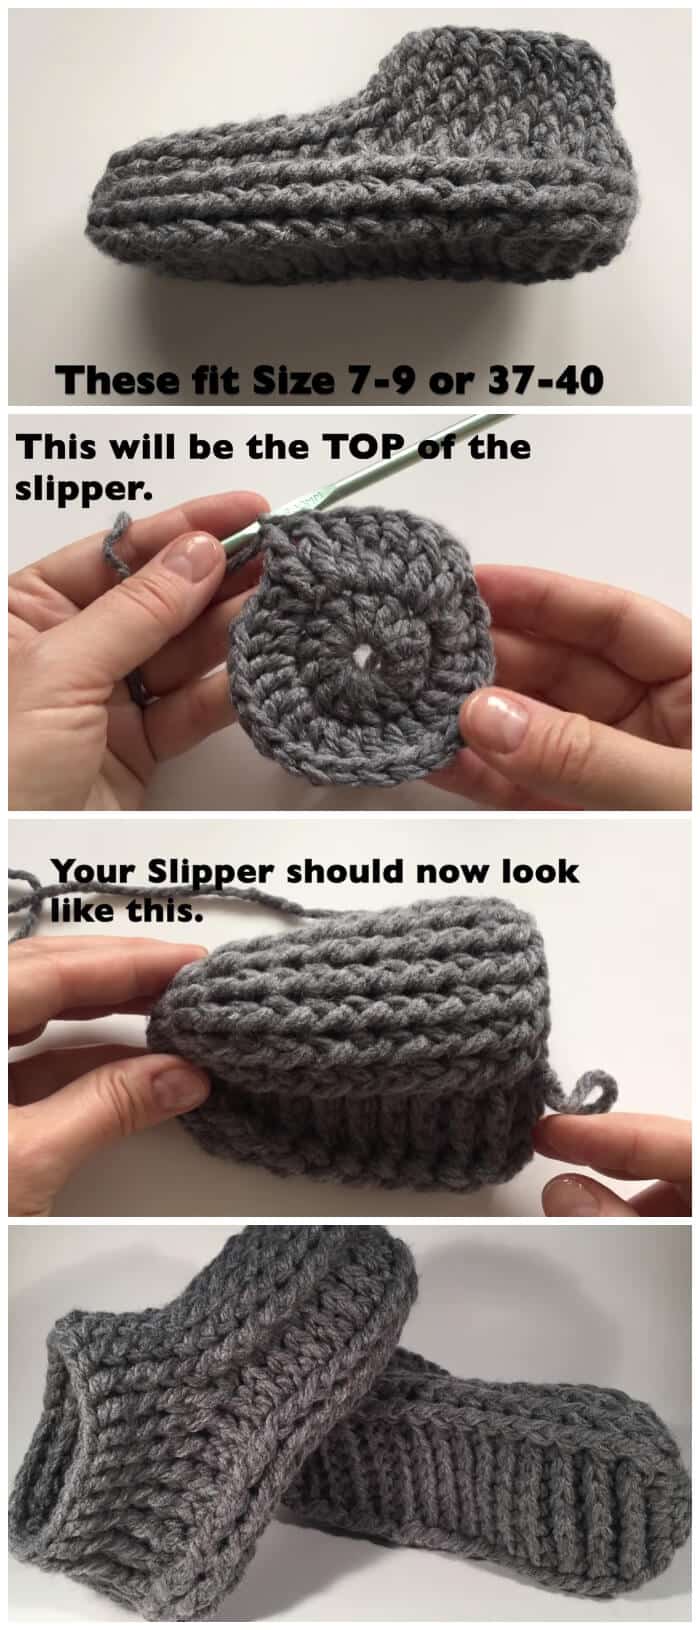 These Super Easy Crochet House Slippers are nothing fancy, just a simple slipper. These would be great to stuff in your purse to wear at others homes if you get cold feet.